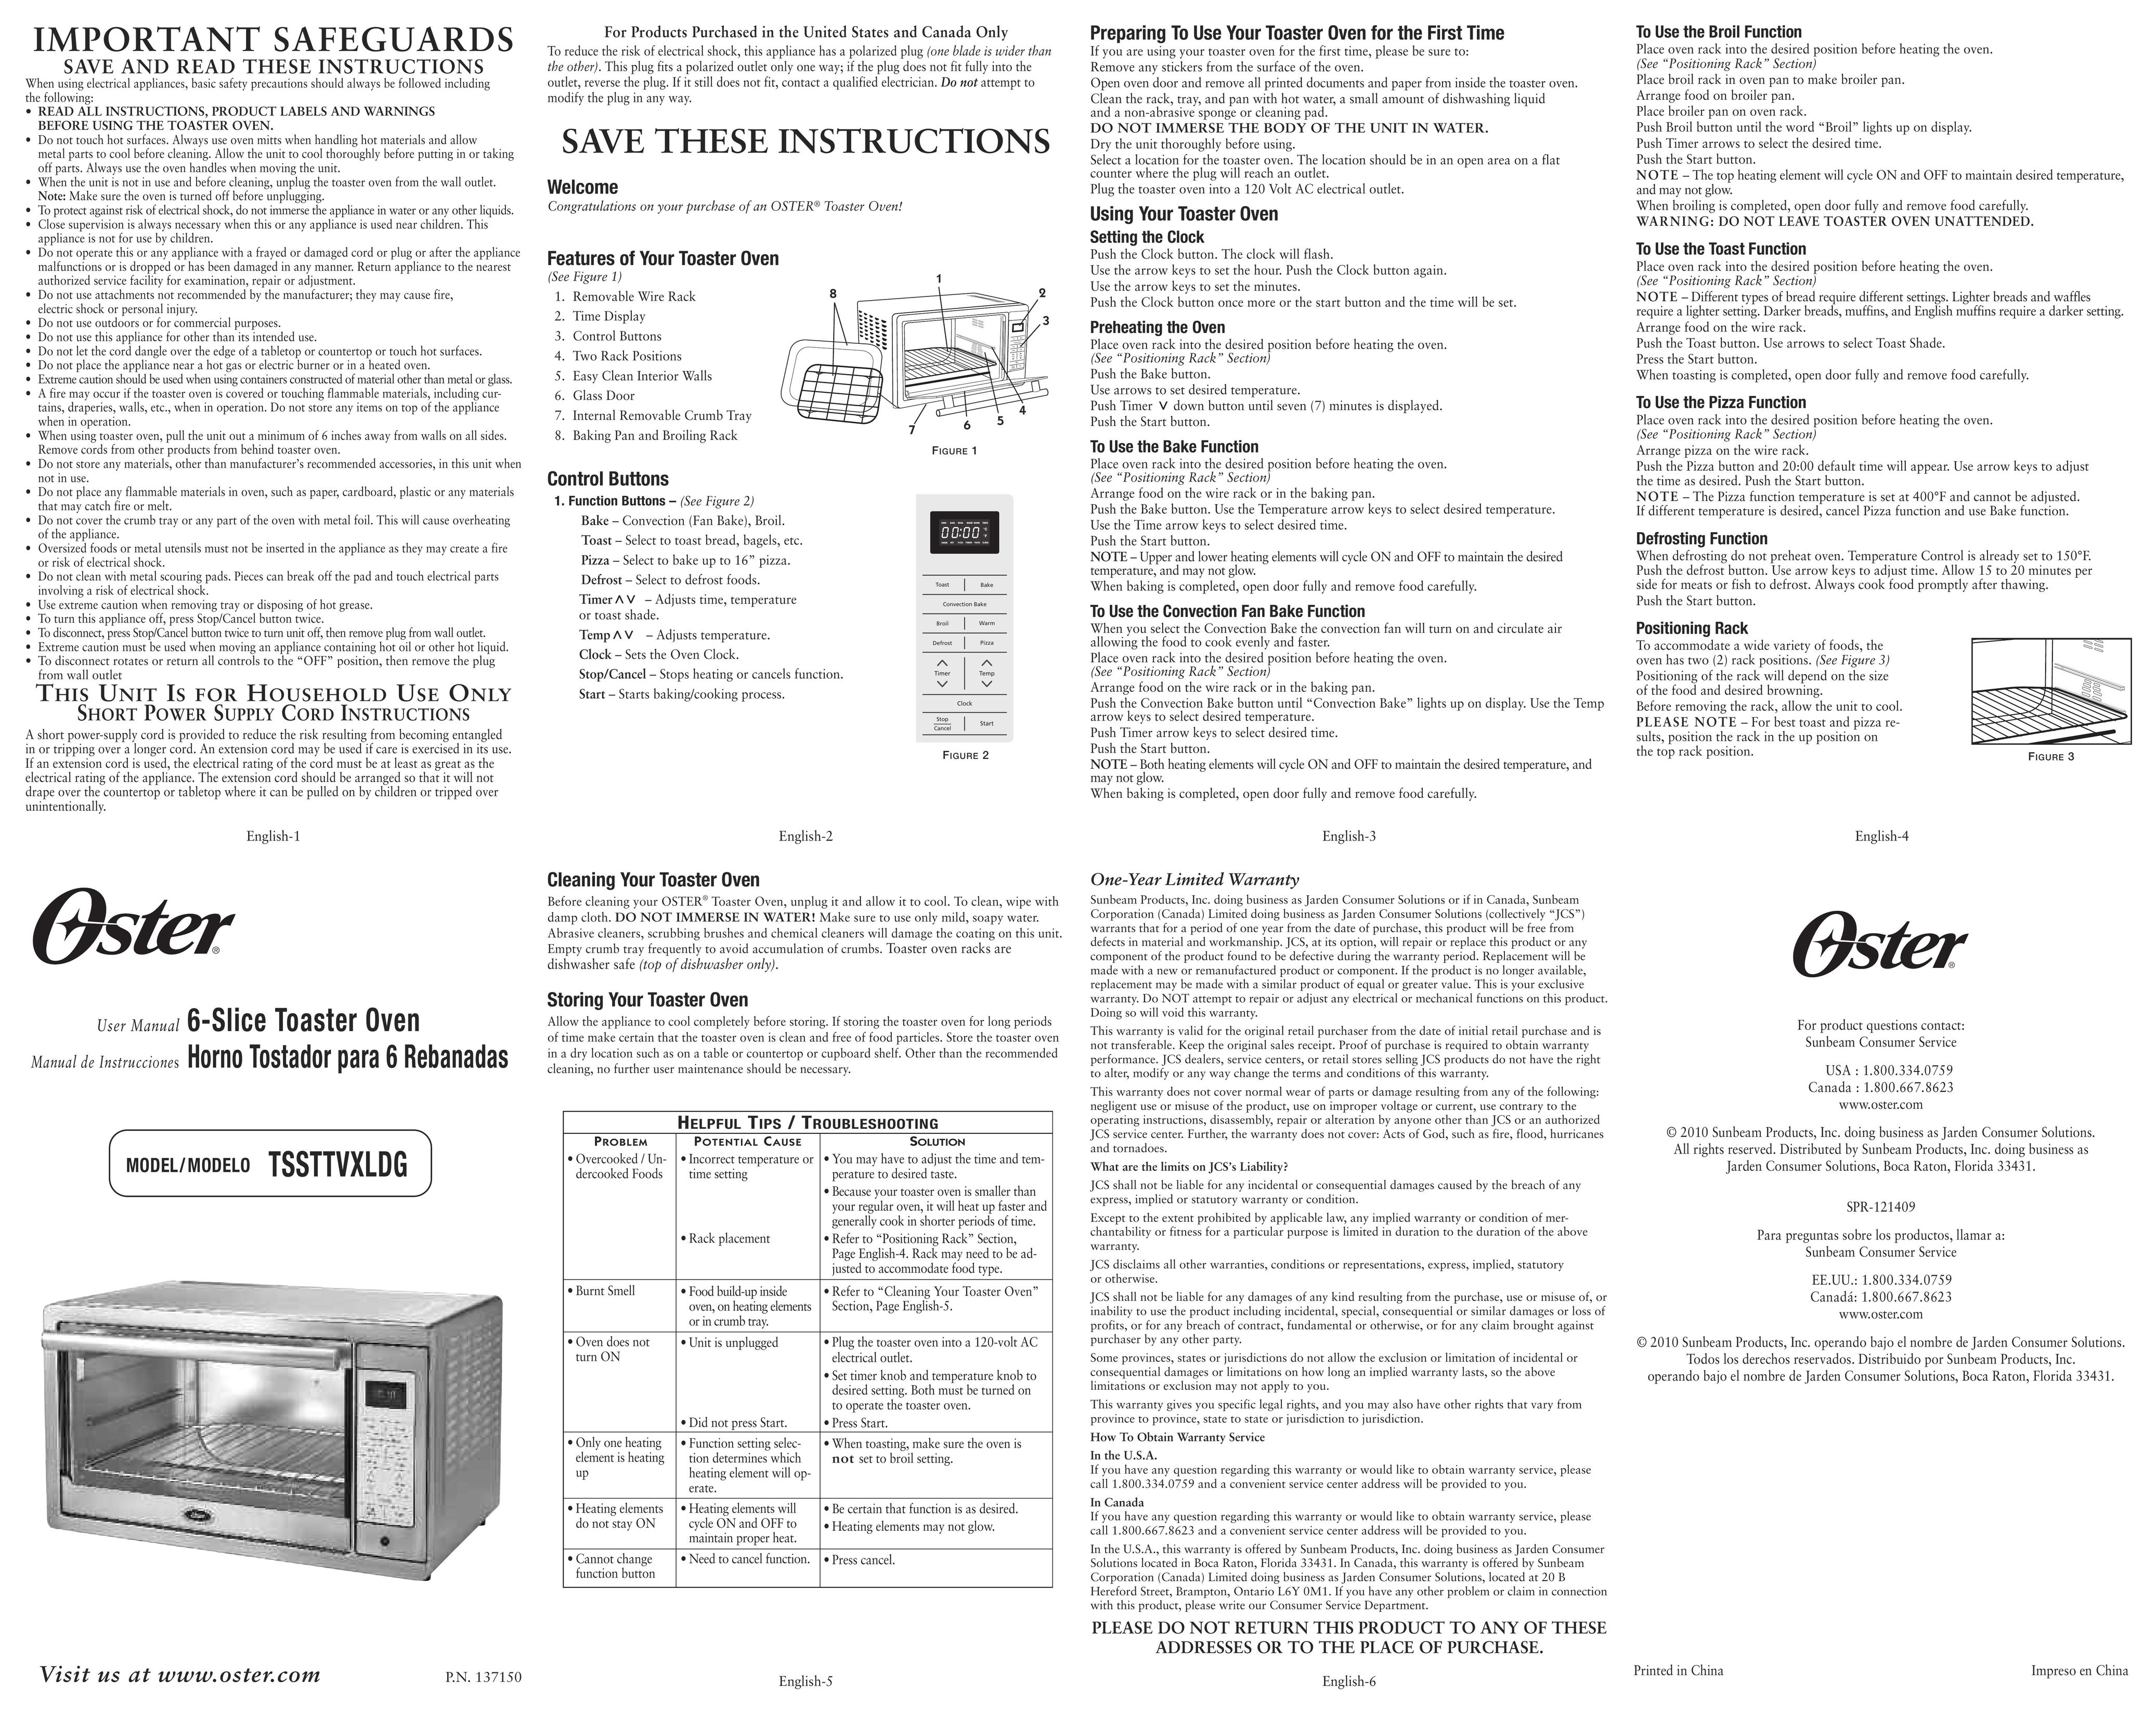 Oster Oster 6-Slice Toaster Oven Microwave Oven User Manual